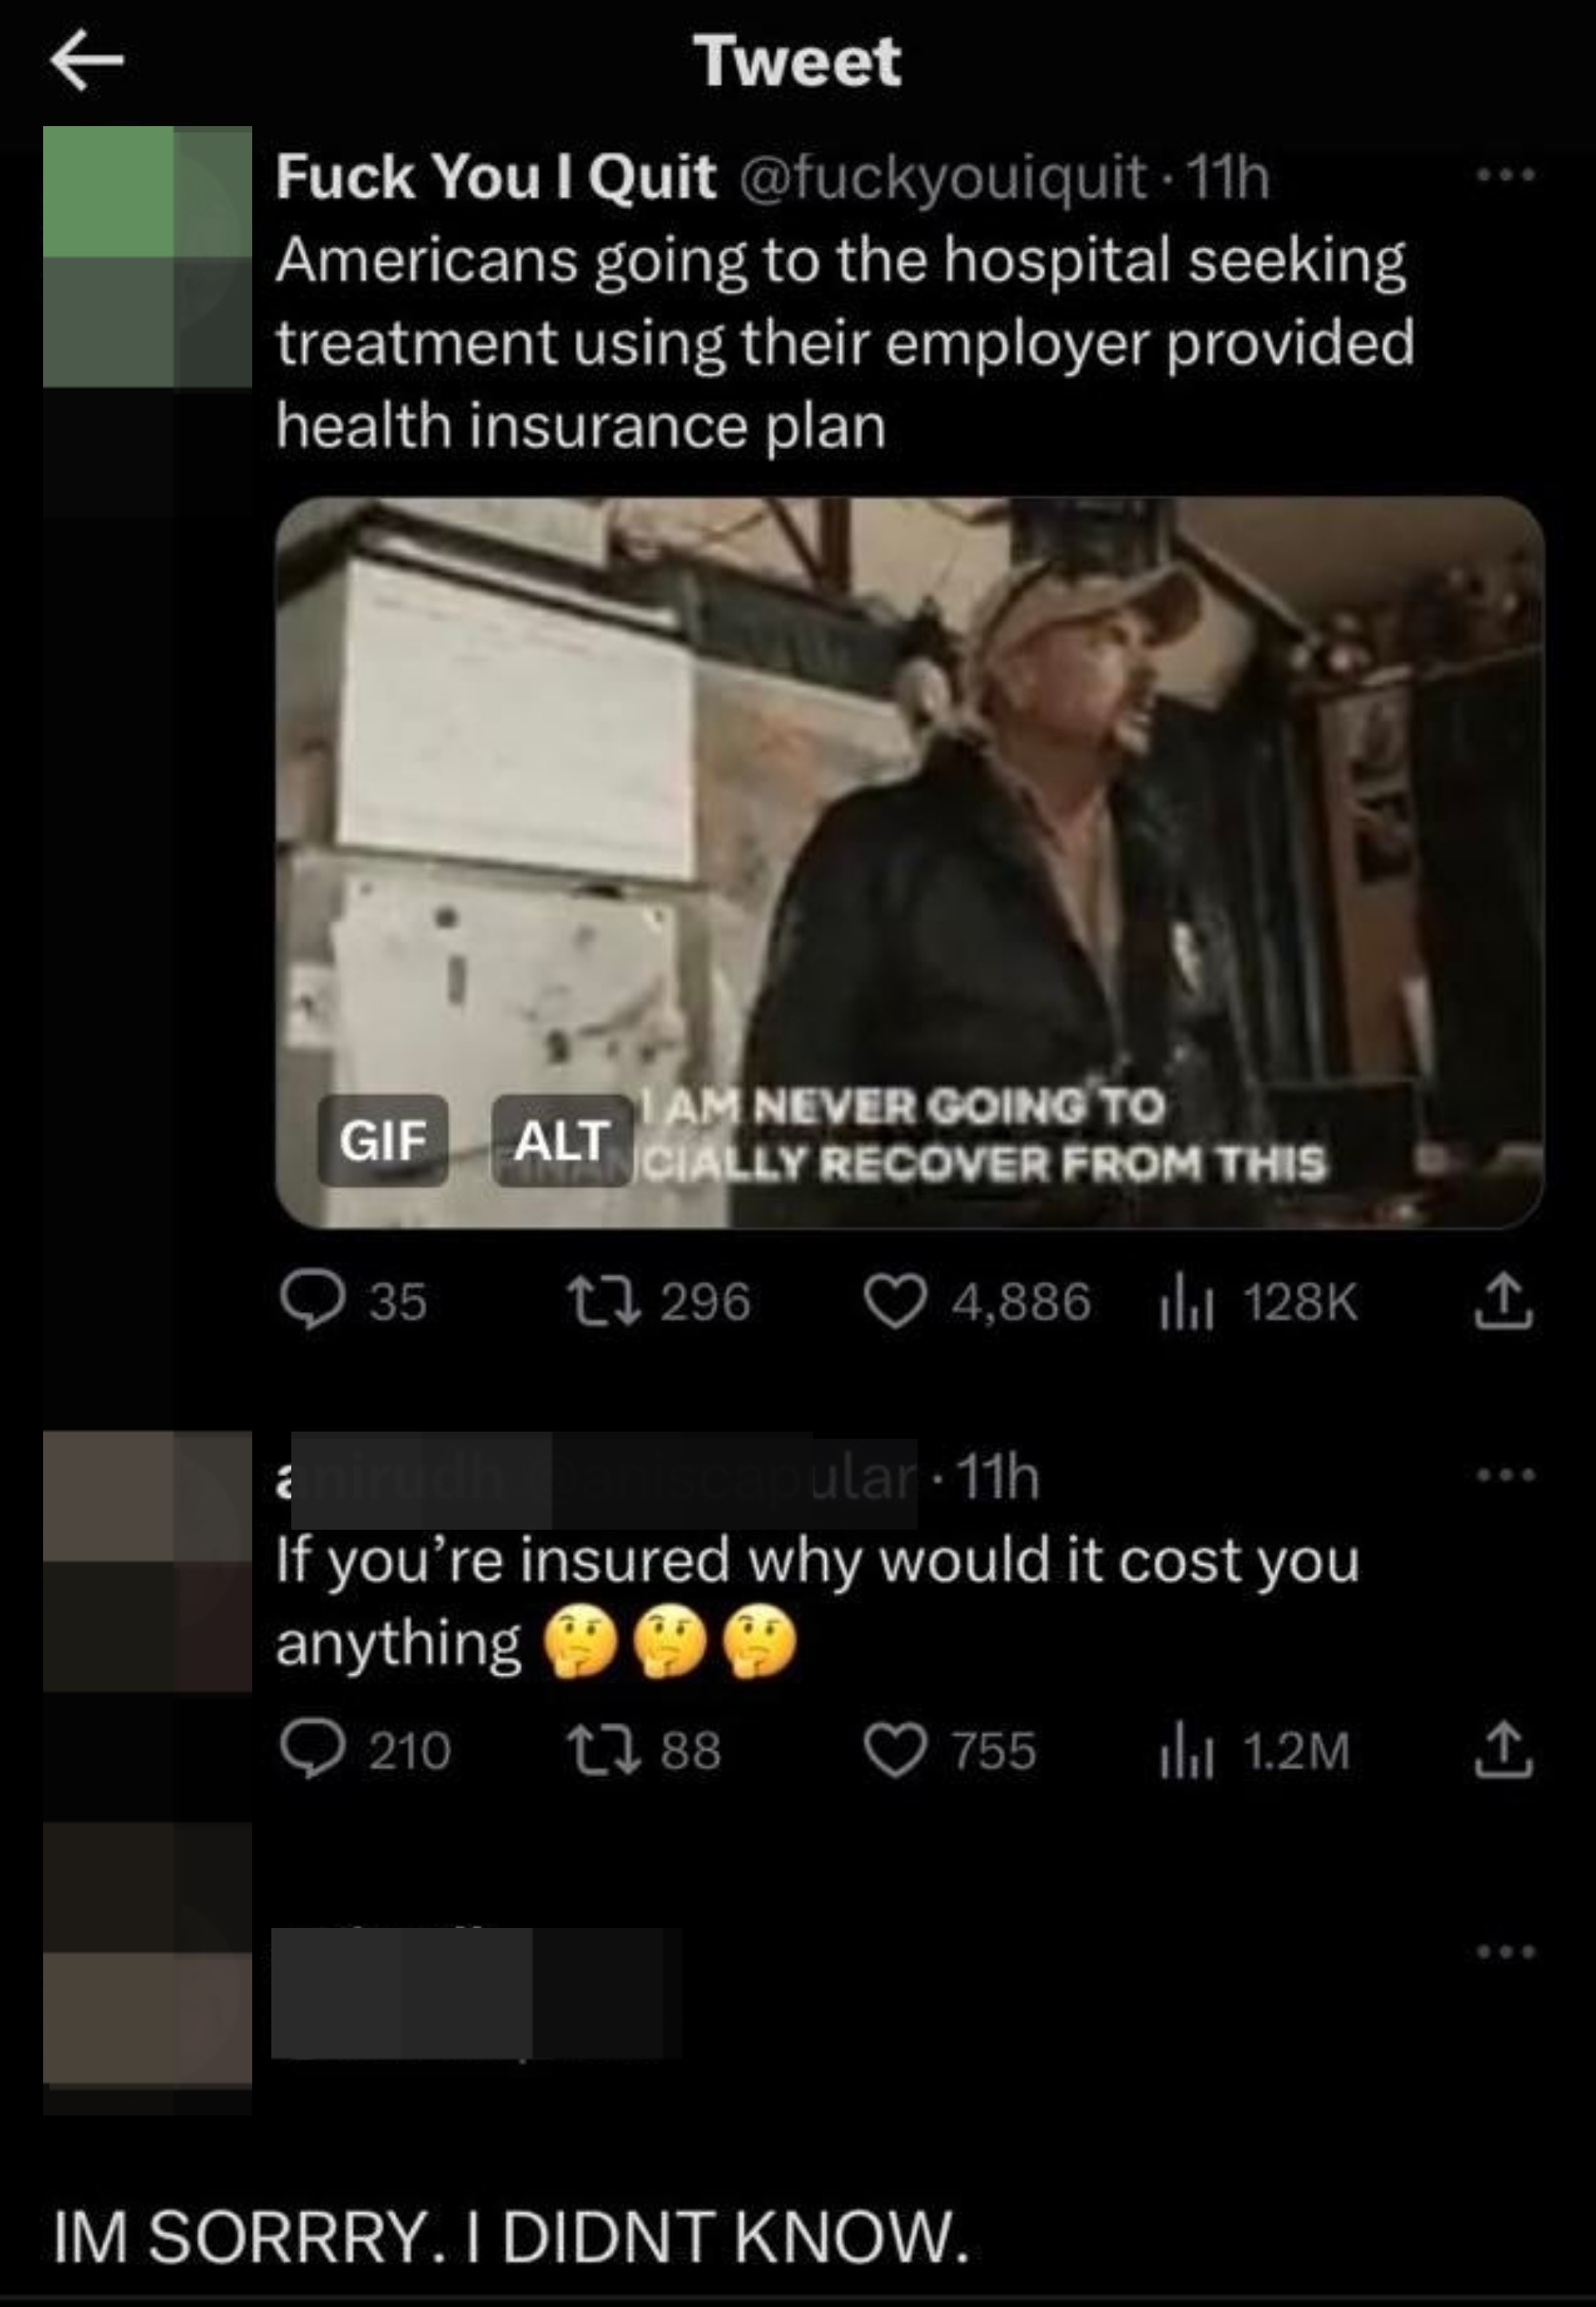 person asking why it would still cost money if you have insurance